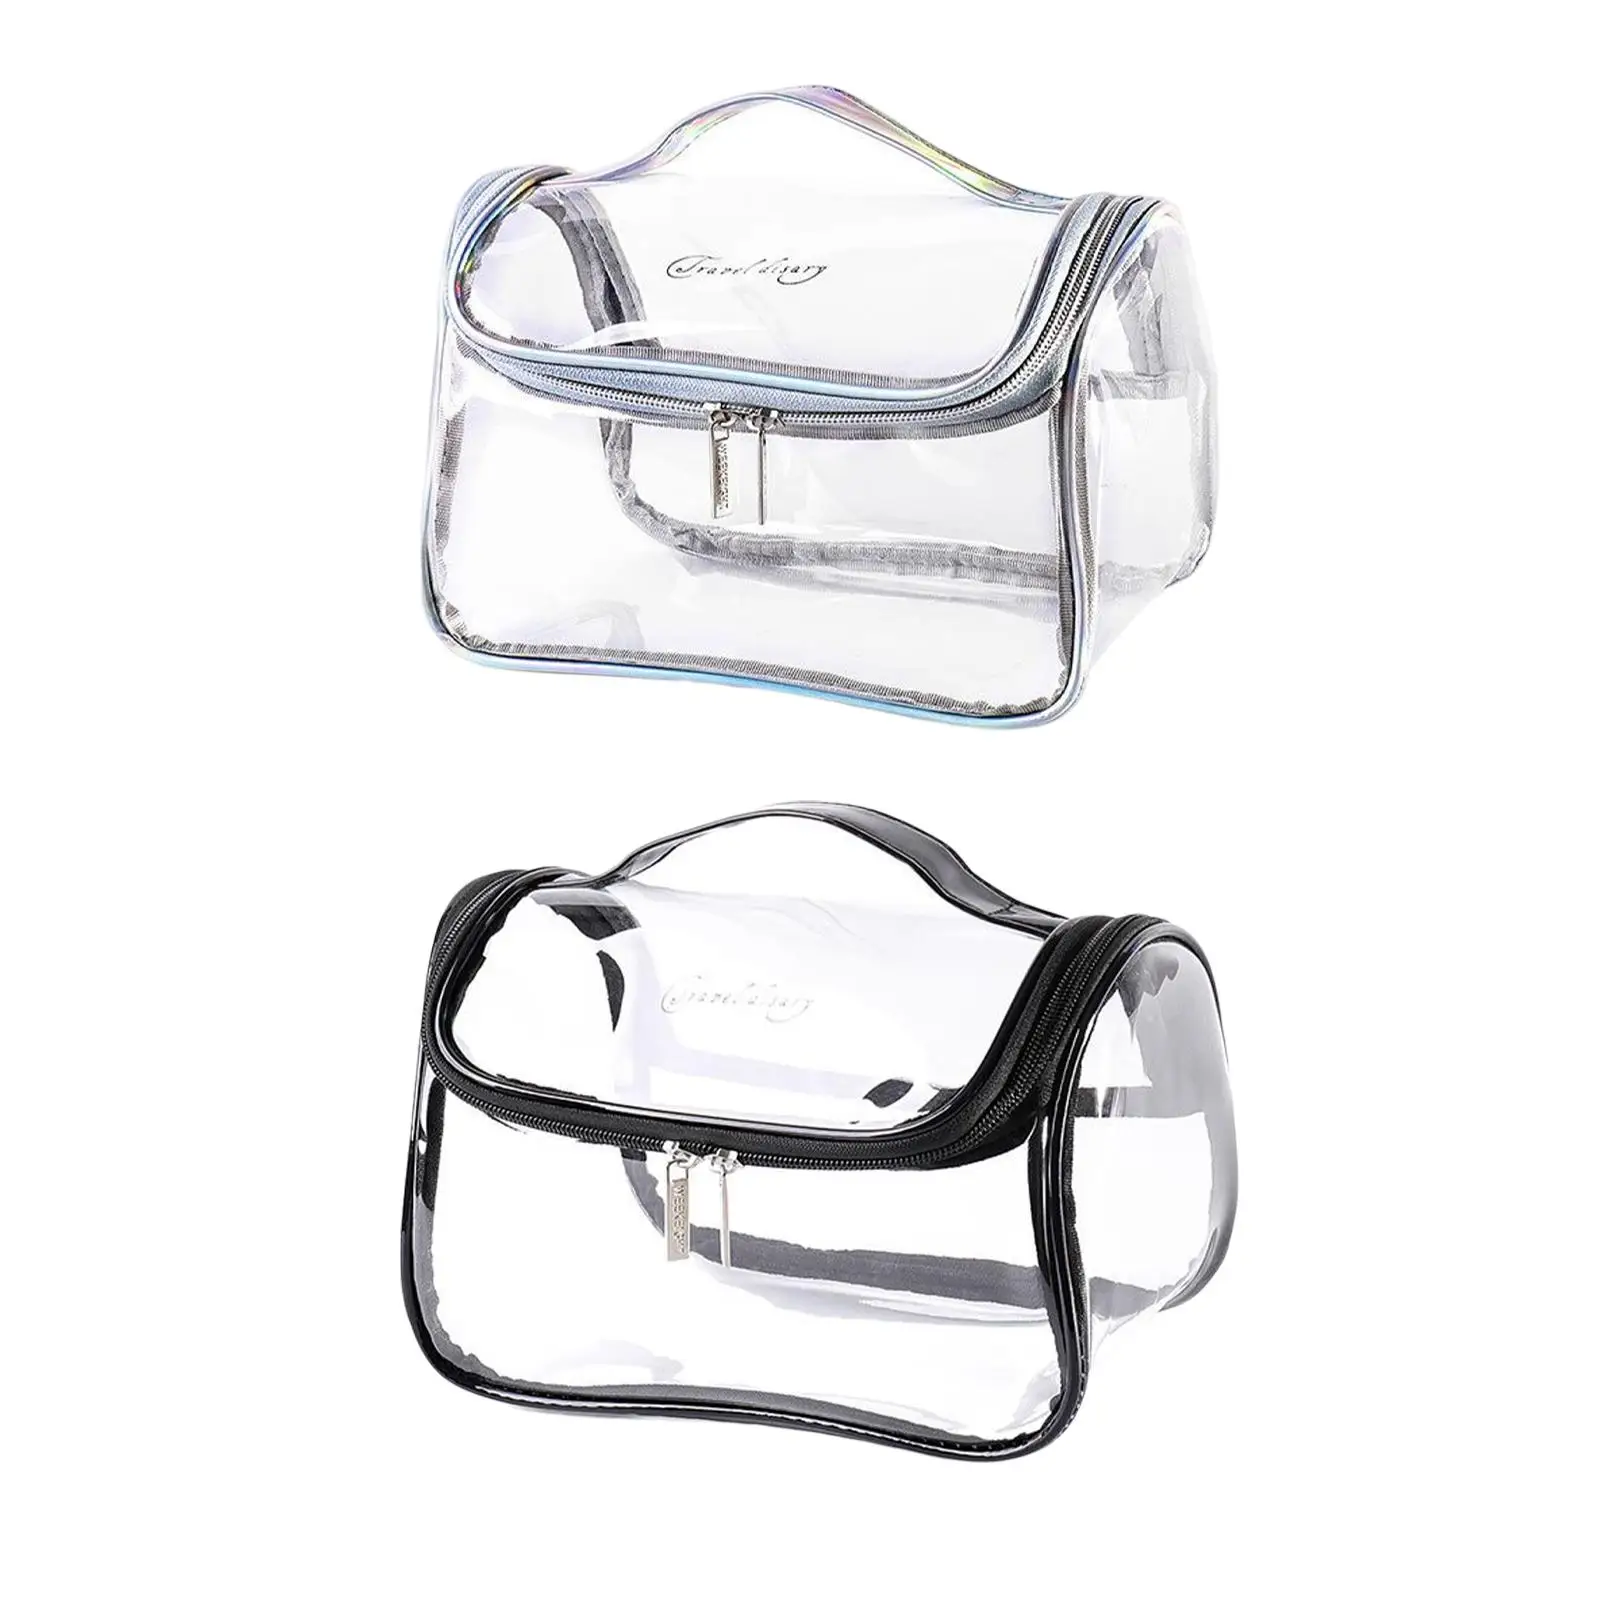 

Clear Makeup Bag Portable Lightweight Toiletry Bag Travel Bag for Carry on Travel Essentials Hair Accessories Beach Gym Airport